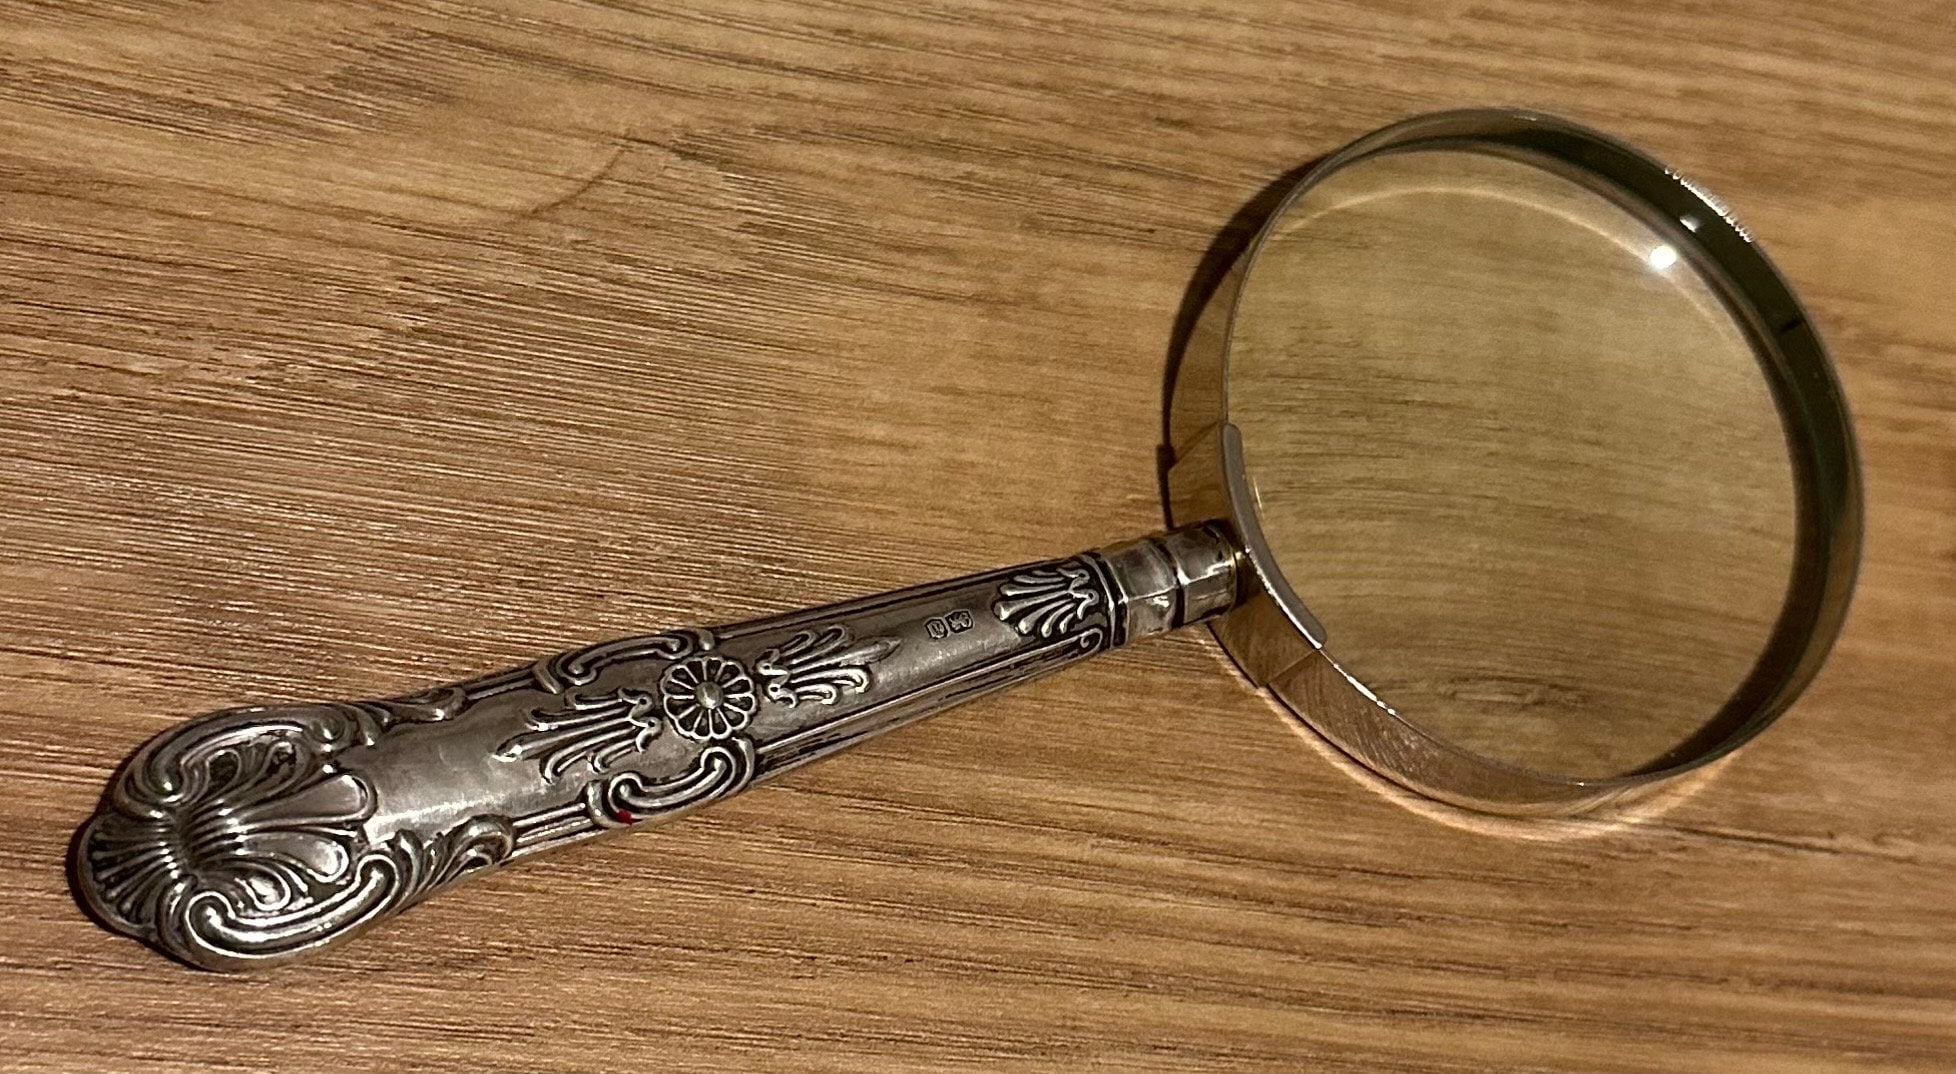 Lady's Antique Magnifying Glass Magnifier - Ruby Lane